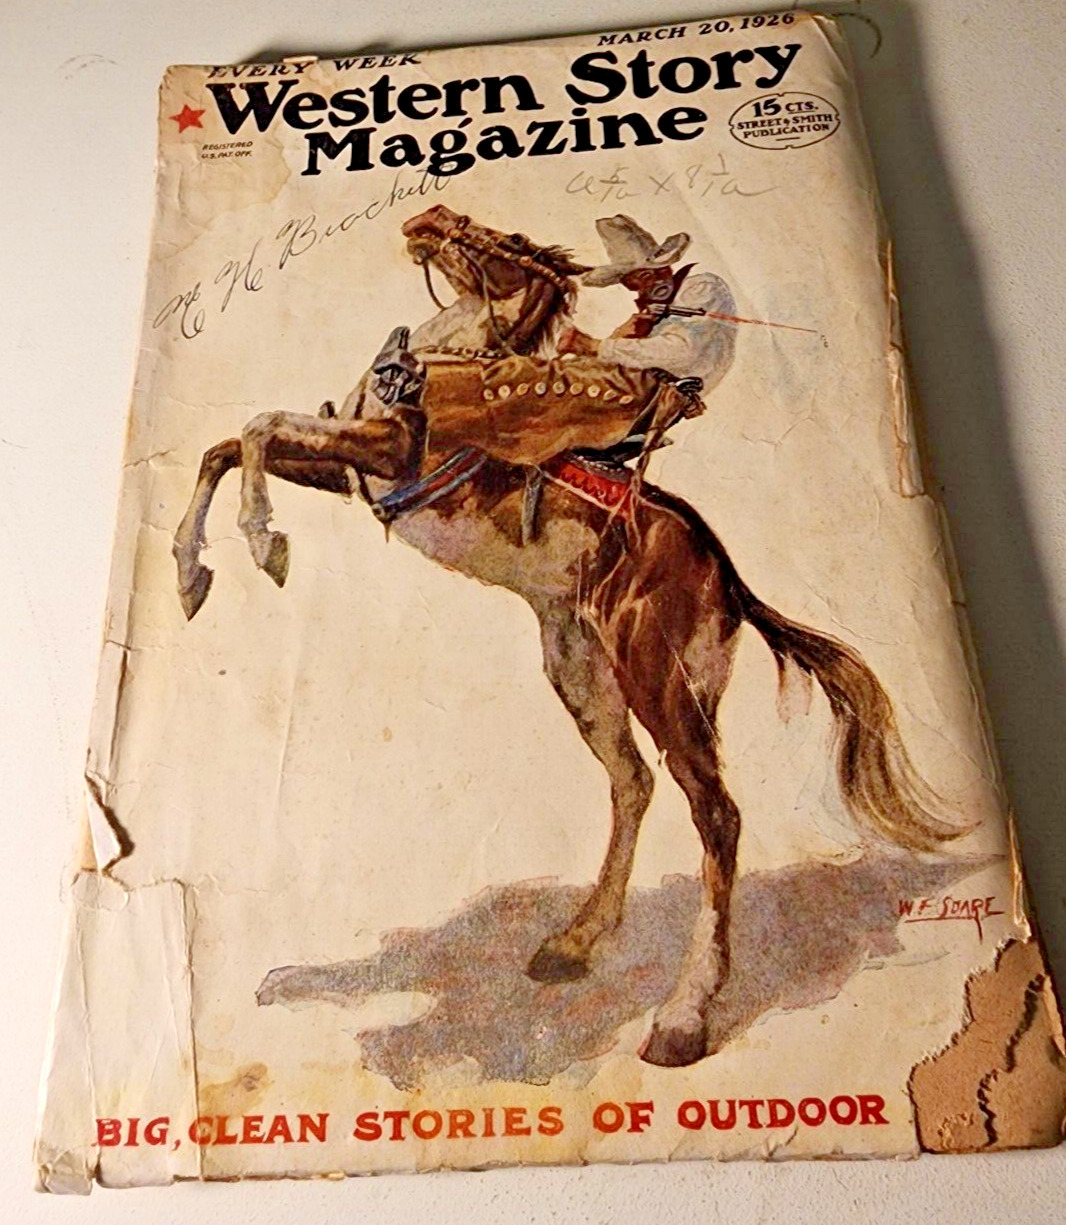 Western Stories March 20 ,1926